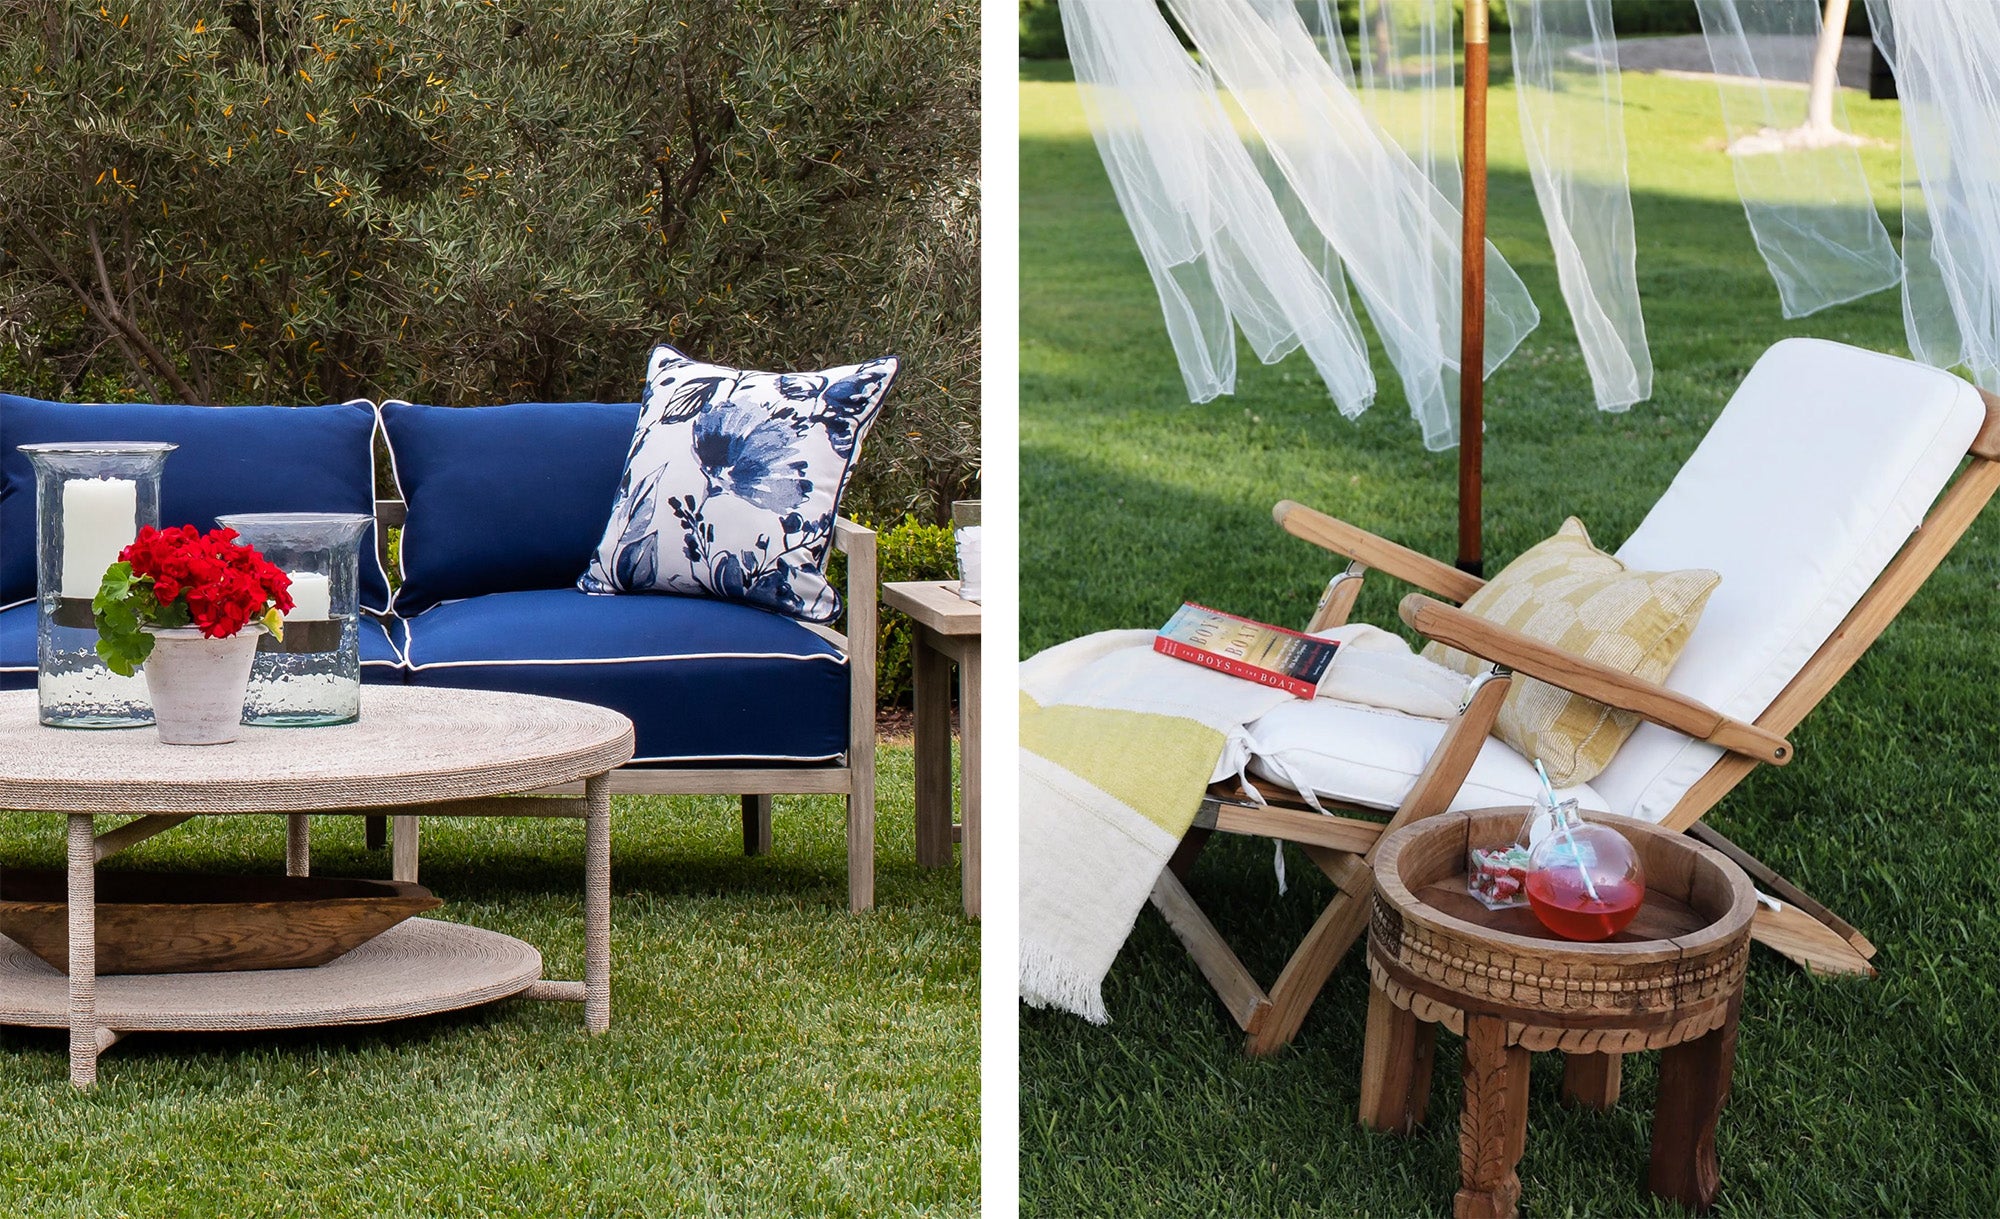 Creating the Ultimate Outdoor Entertaining Space: Tracey’s 3 Top Tips 